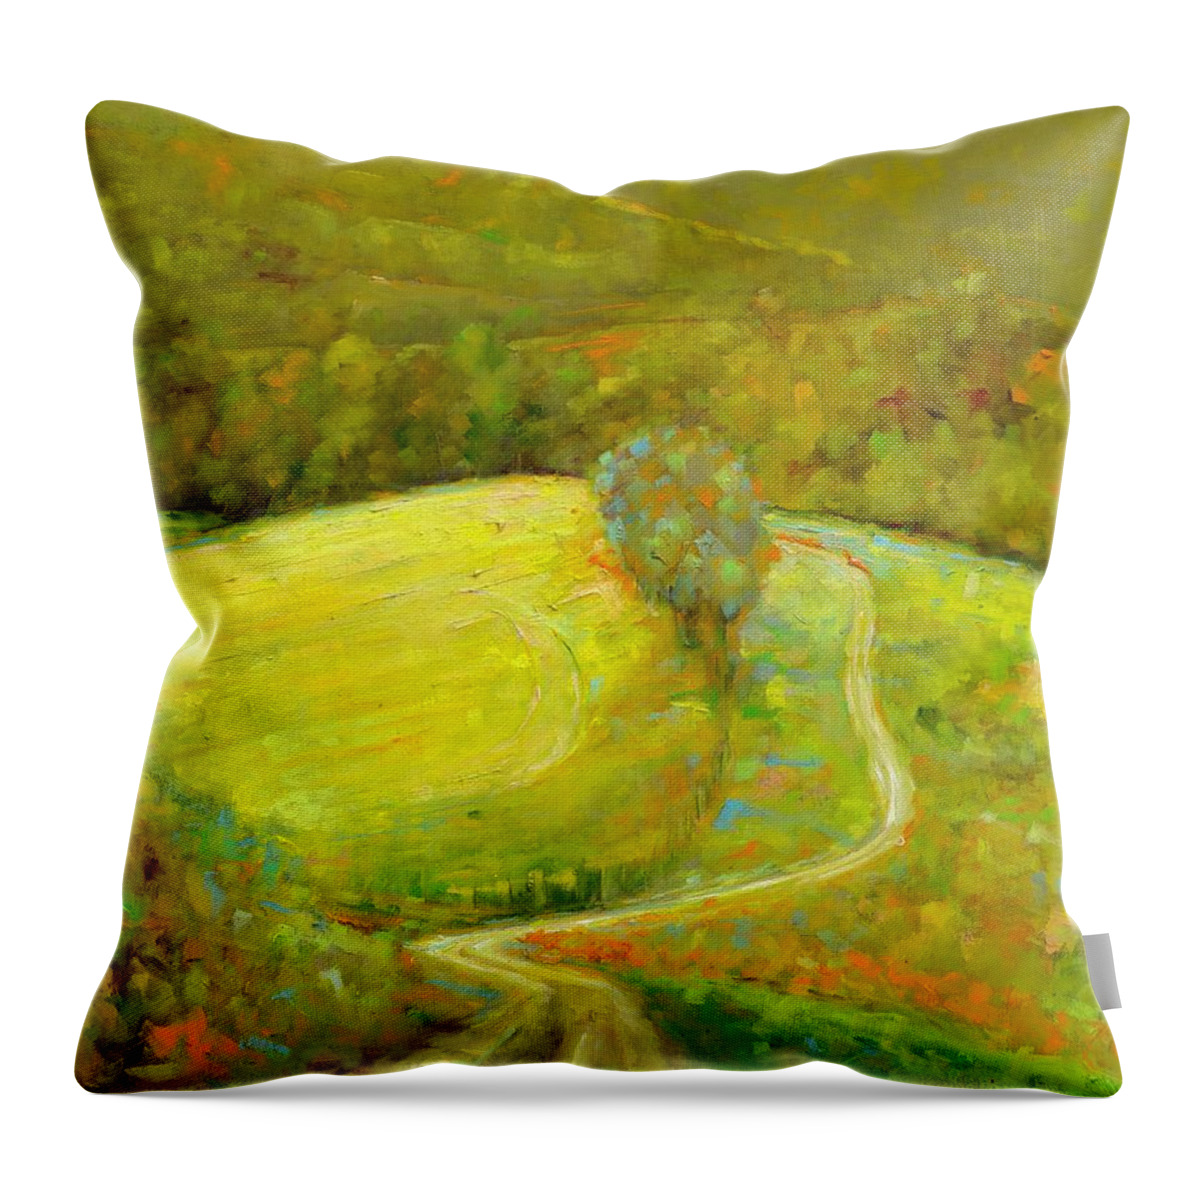 Tracks Throw Pillow featuring the painting Tracks by Roger Clarke